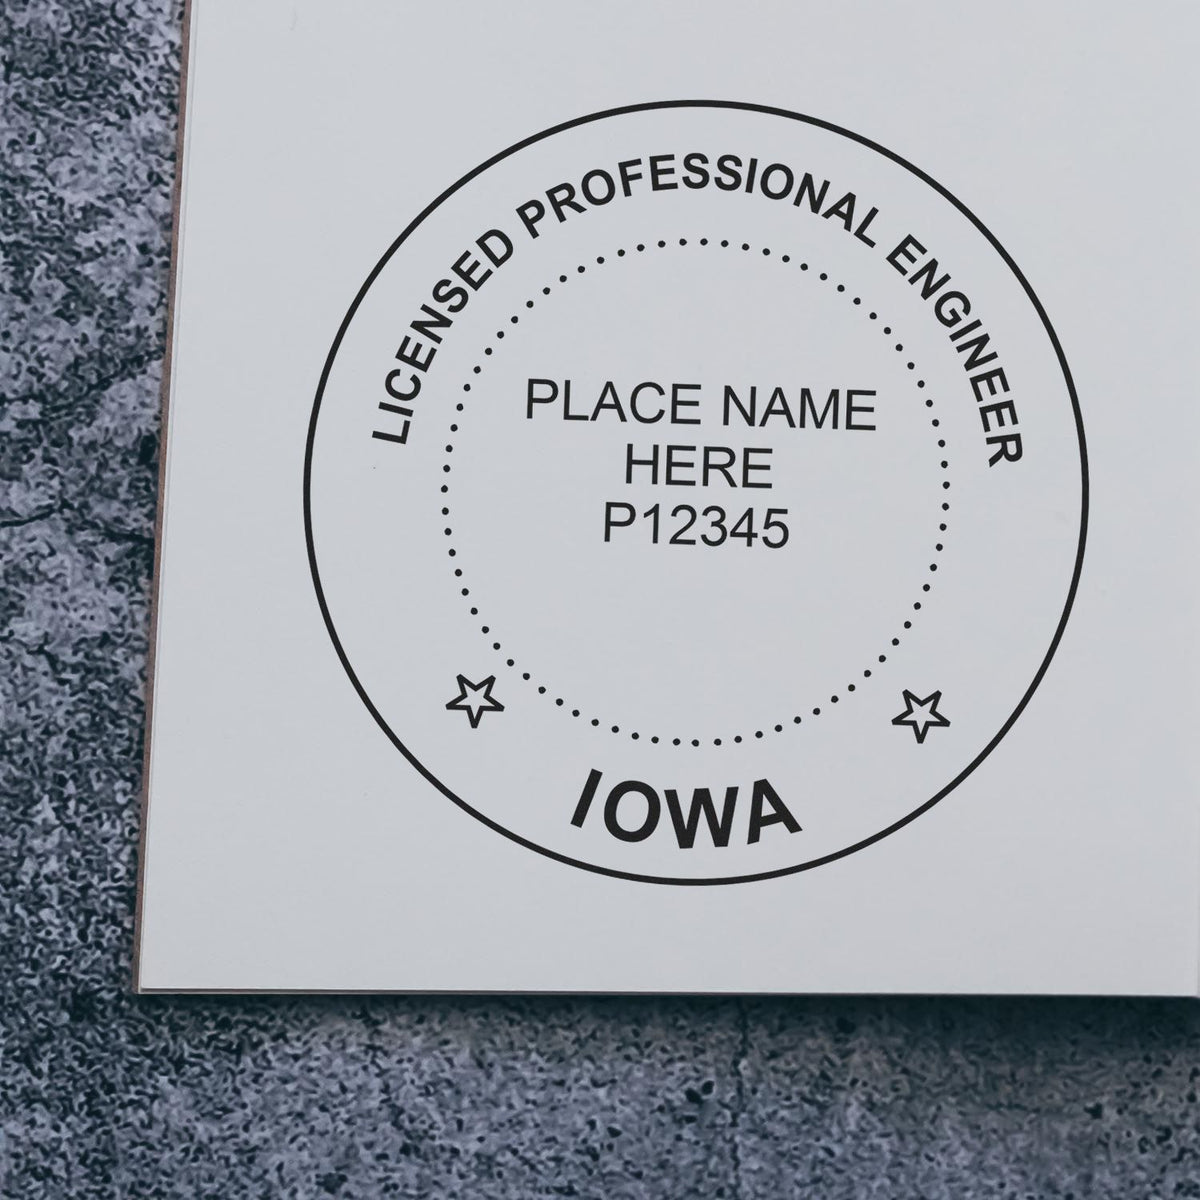 A stamped impression of the Slim Pre-Inked Iowa Professional Engineer Seal Stamp in this stylish lifestyle photo, setting the tone for a unique and personalized product.